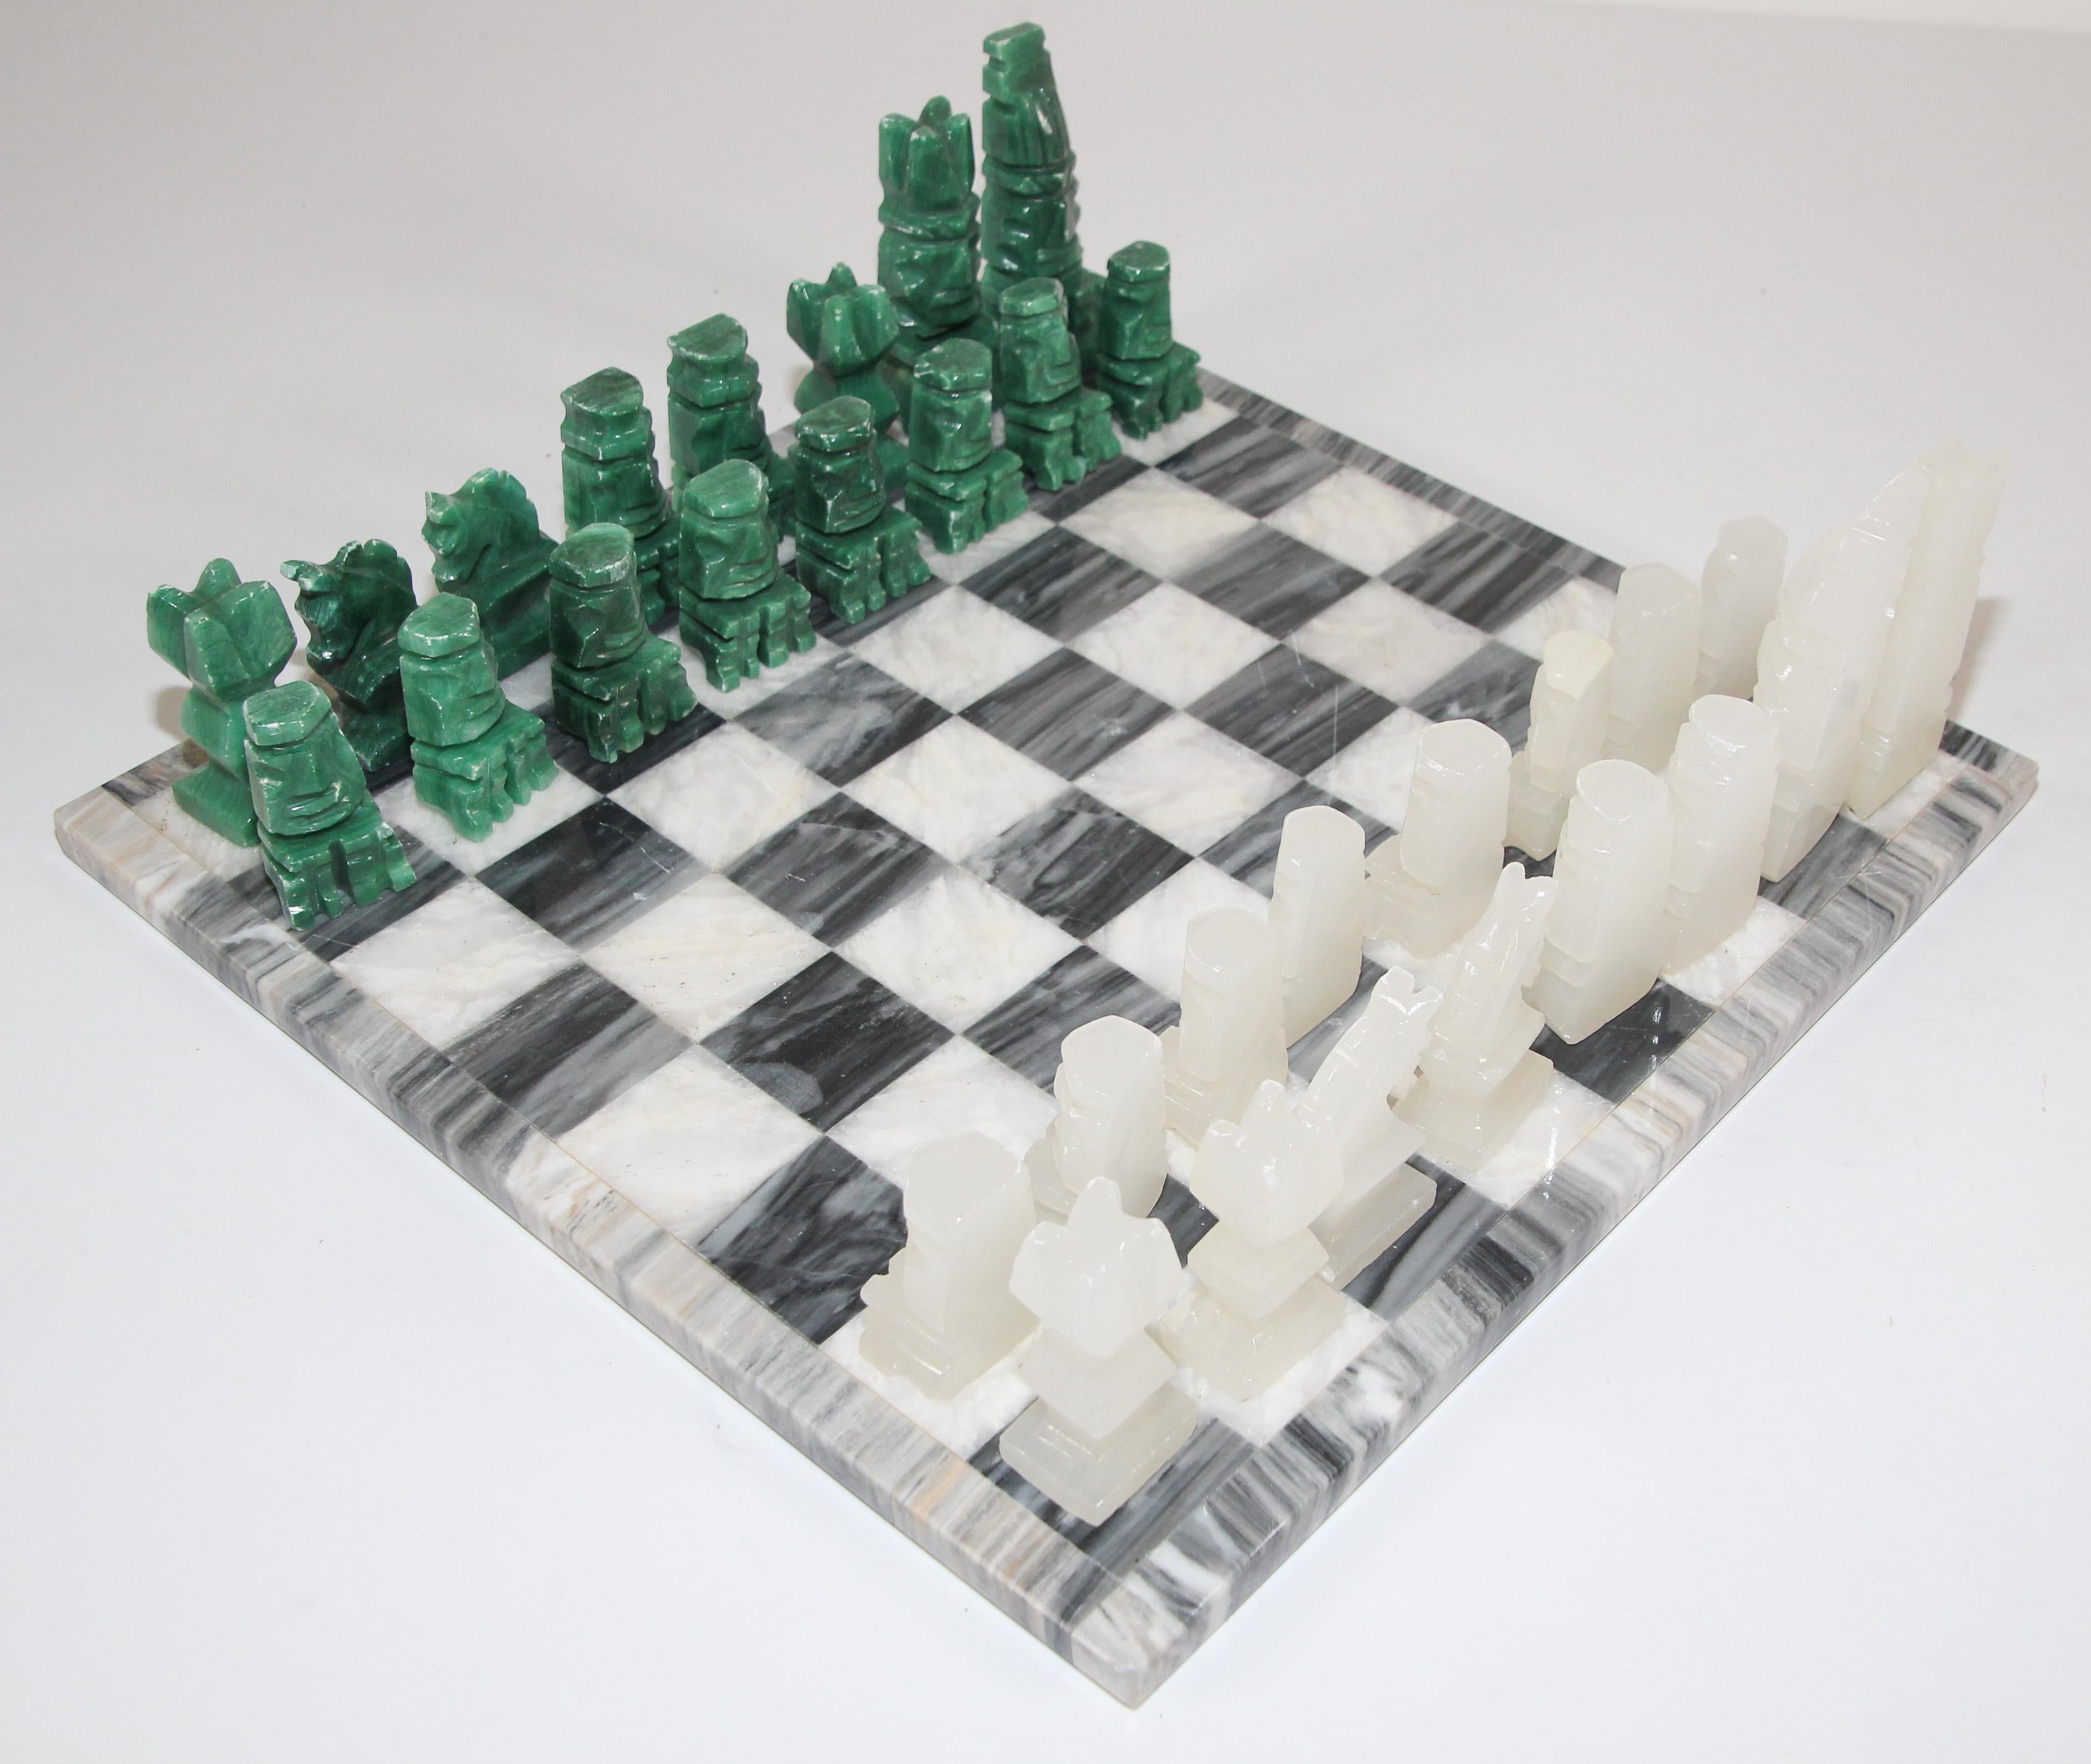 Vintage large heavy marble chess set complete board in white and black with chess set with elaborately onyx hand carved chess pieces.
Complete green malachite and white marble stone chessboard with game pieces. 
Hand-carved from three different